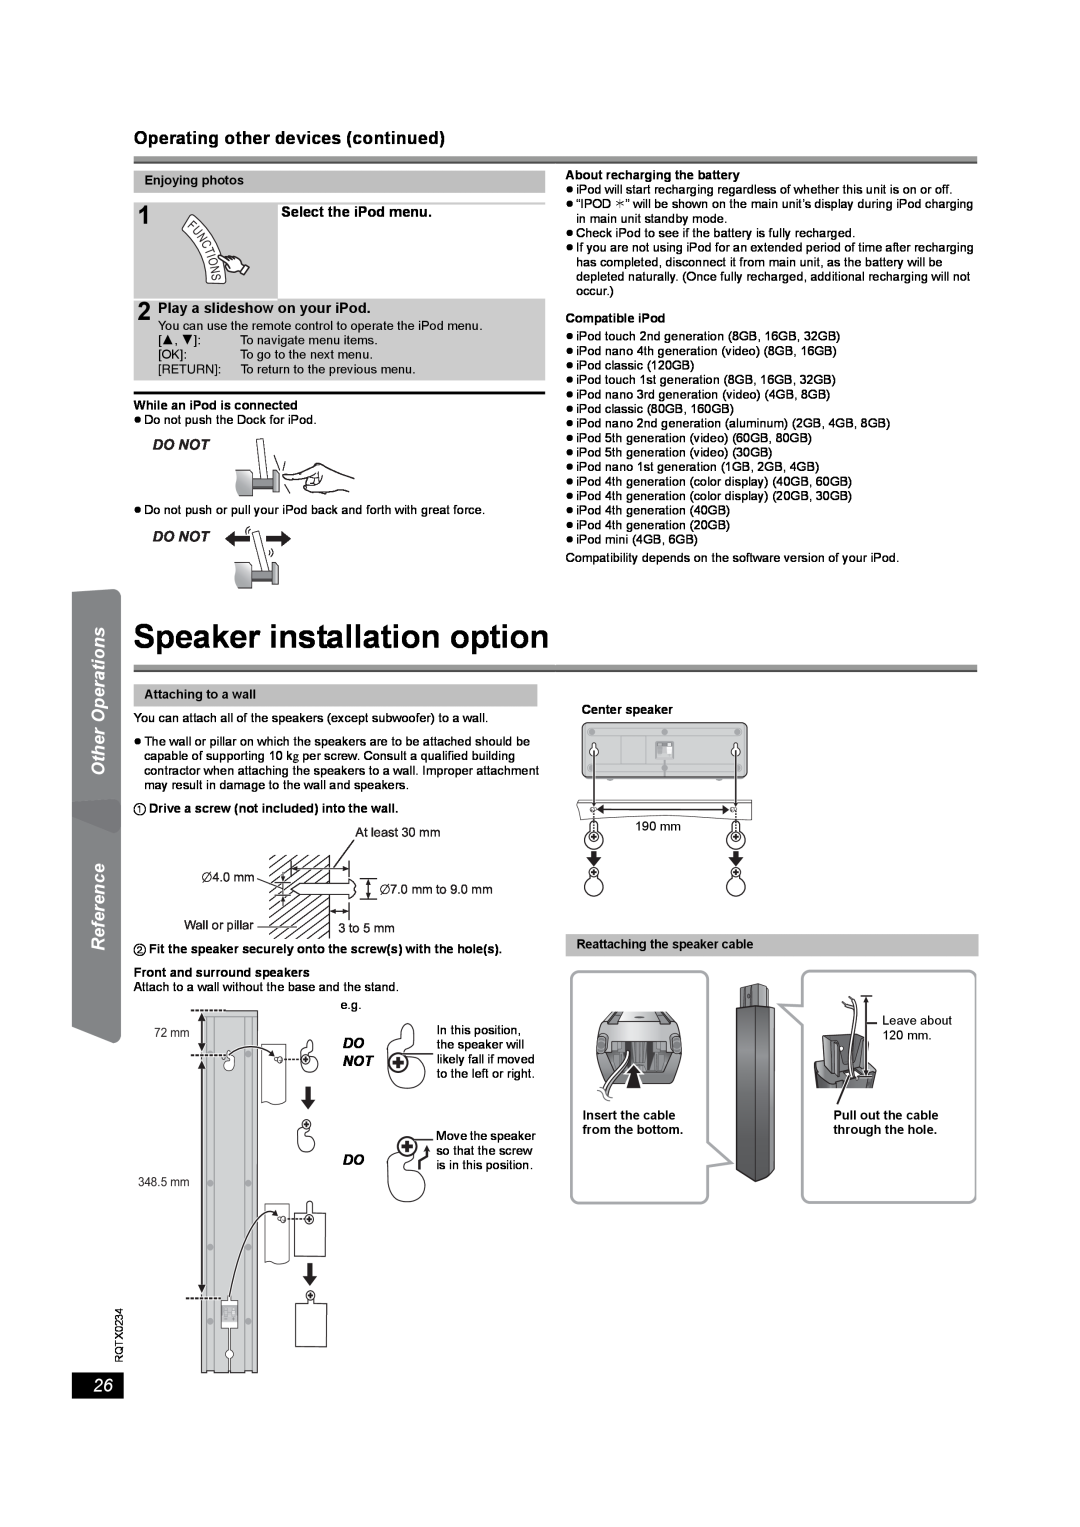 Panasonic SC-PT875 Operating other devices continued, Speaker installation option, Playing, Operations, Other, Reference 